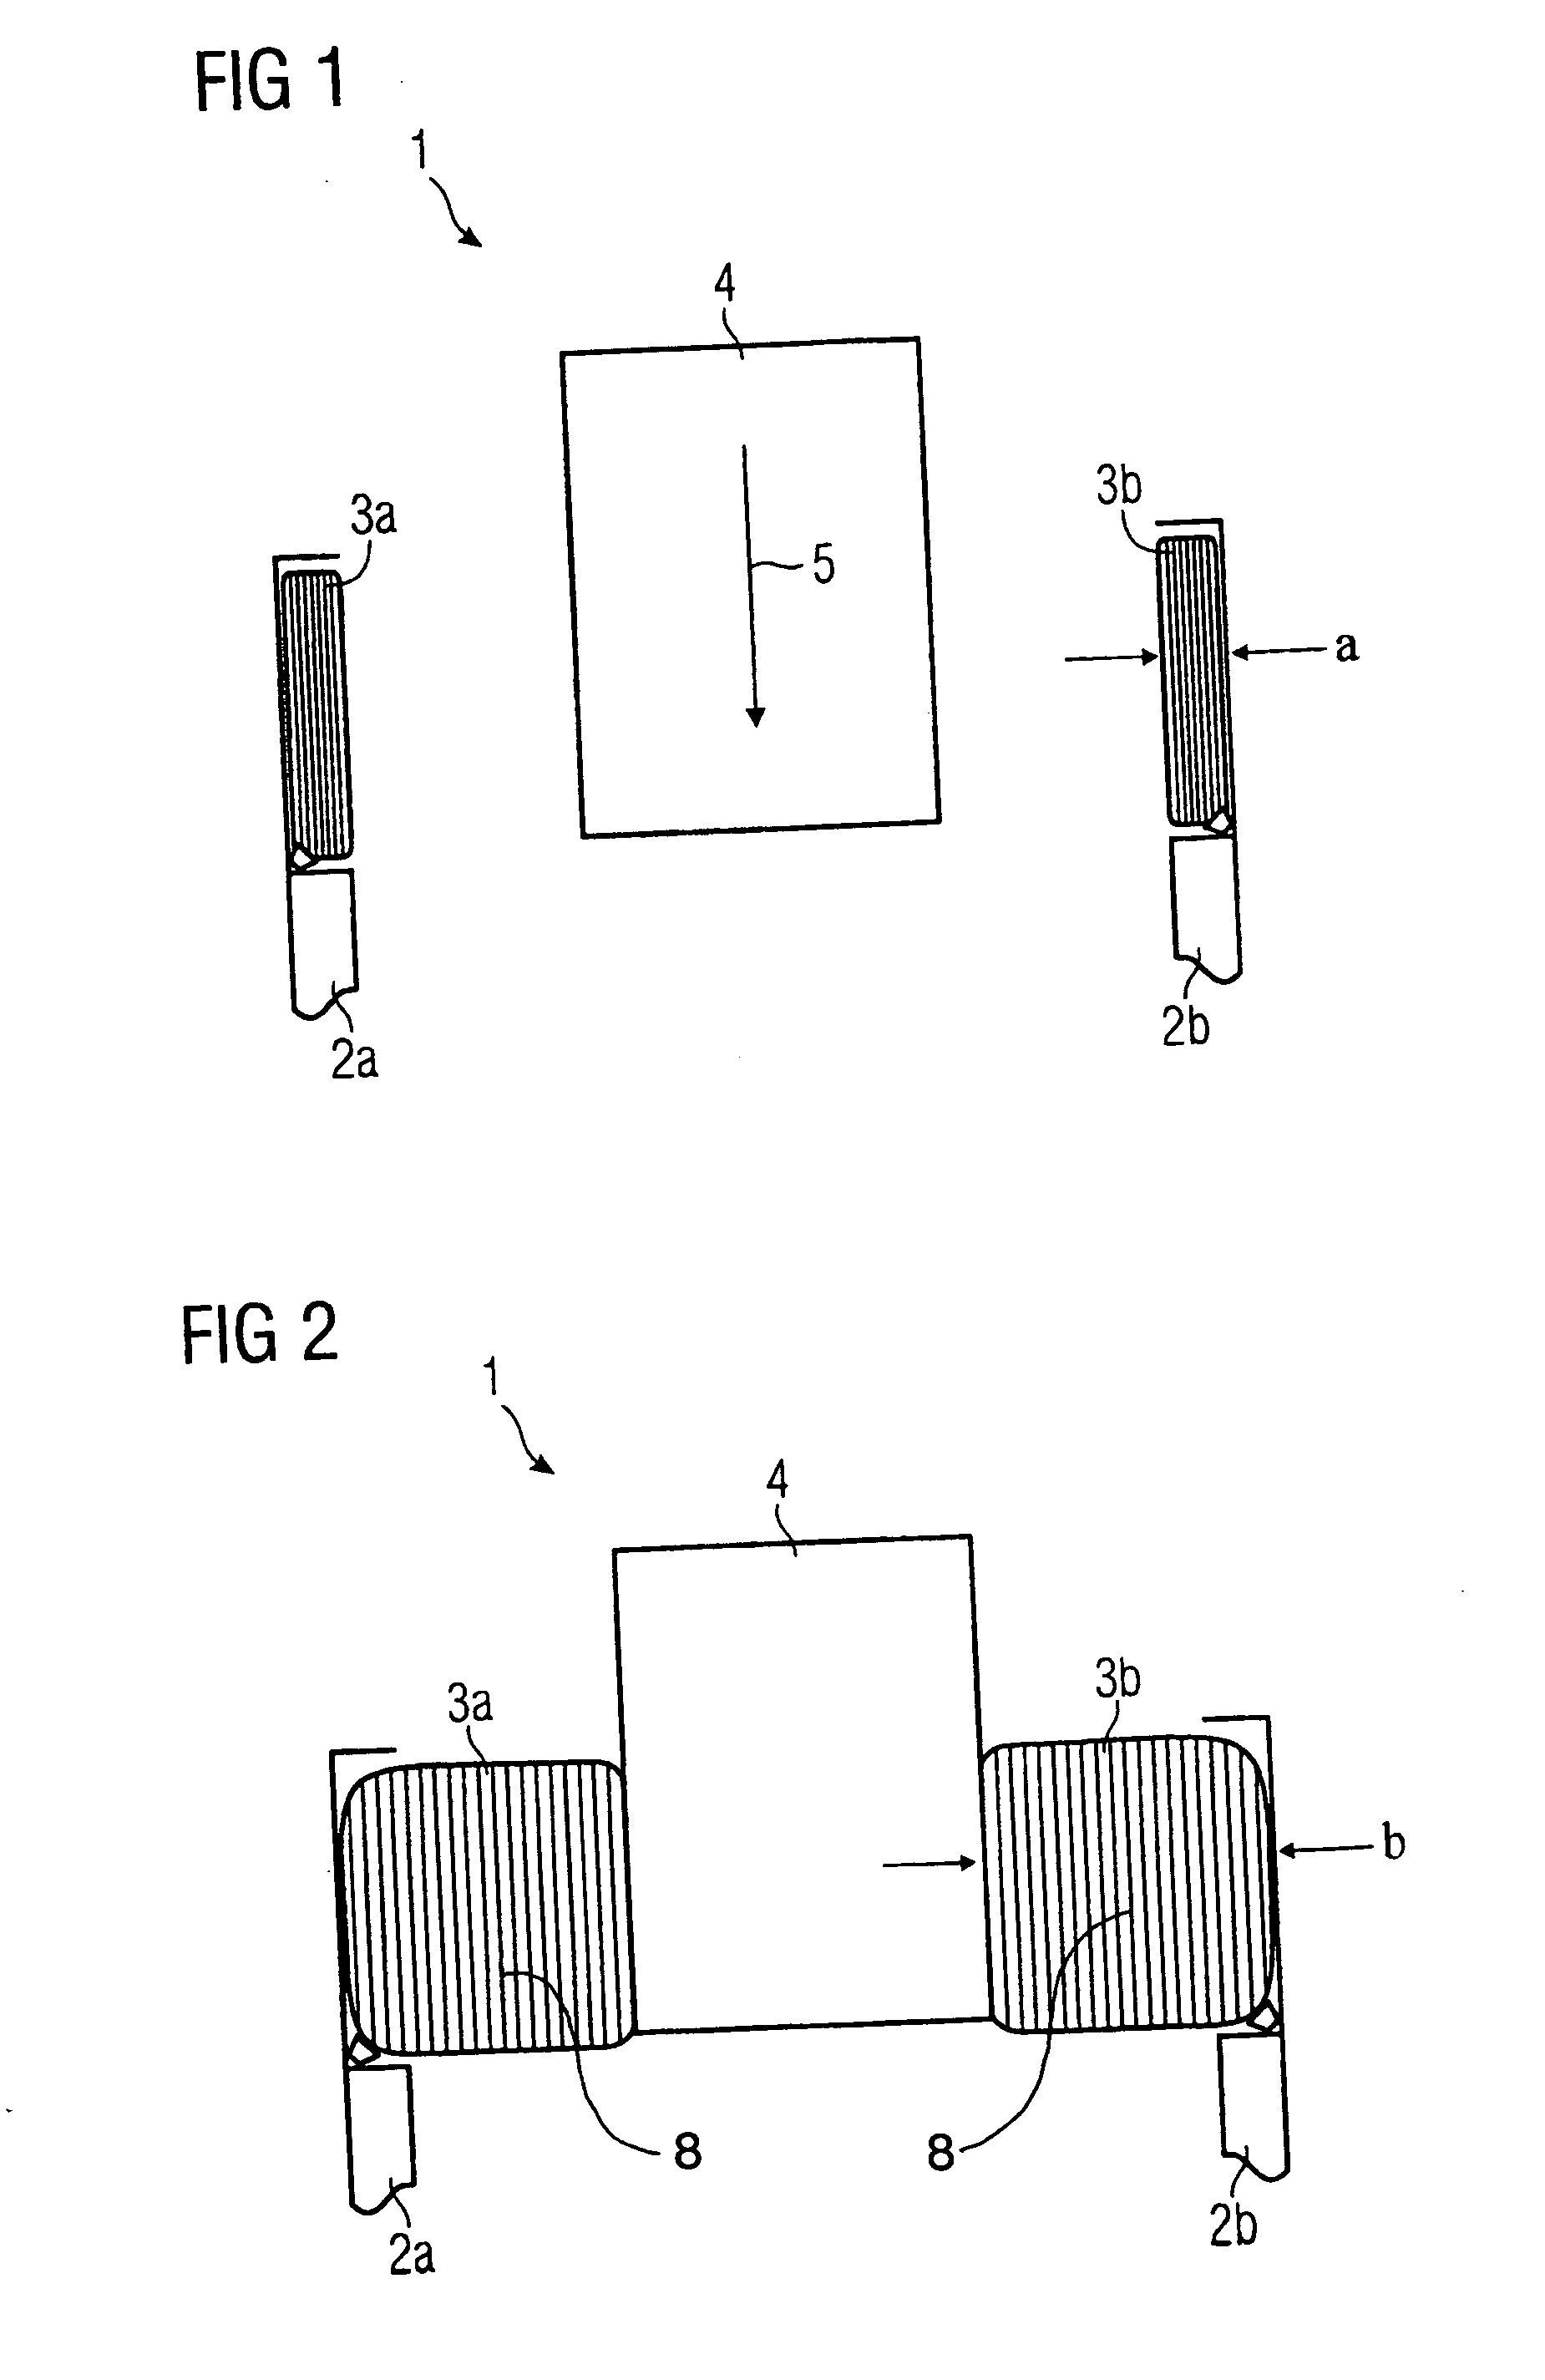 Load-lifting device for handling items